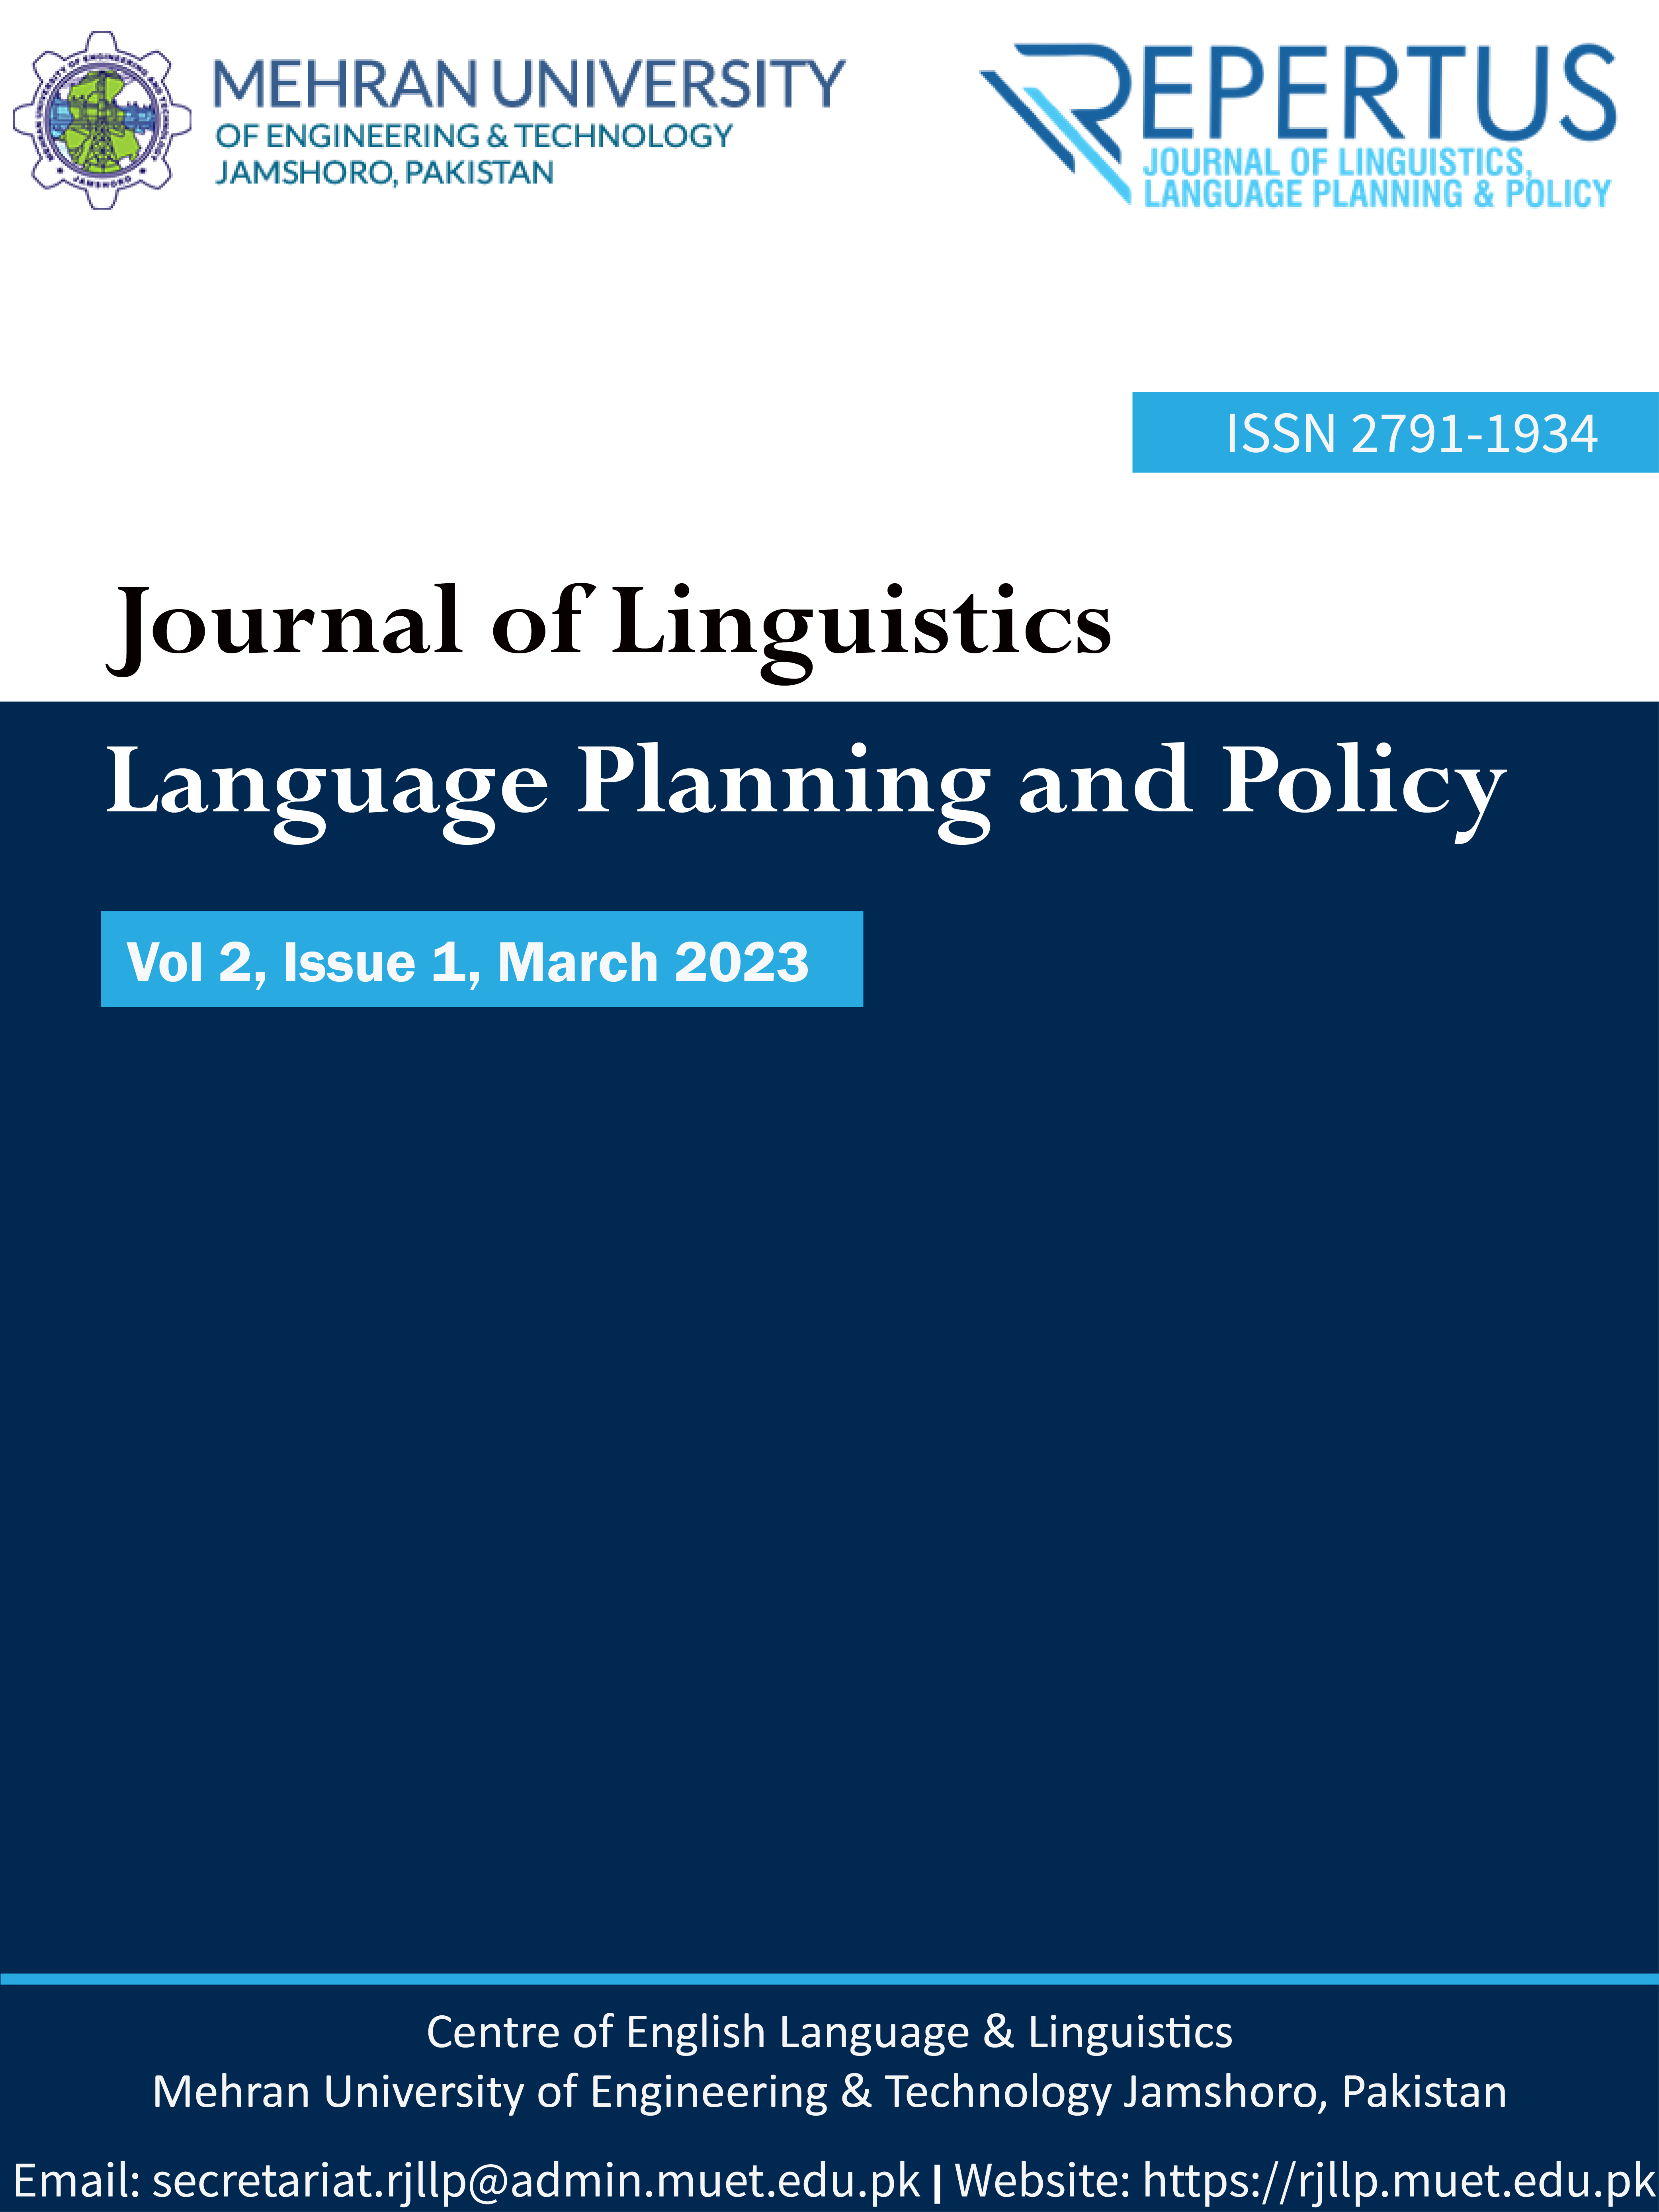 					View Repertus: Journal of Linguistics, Language Planning and Policy, March 2023, Vol 2, Issue 1
				